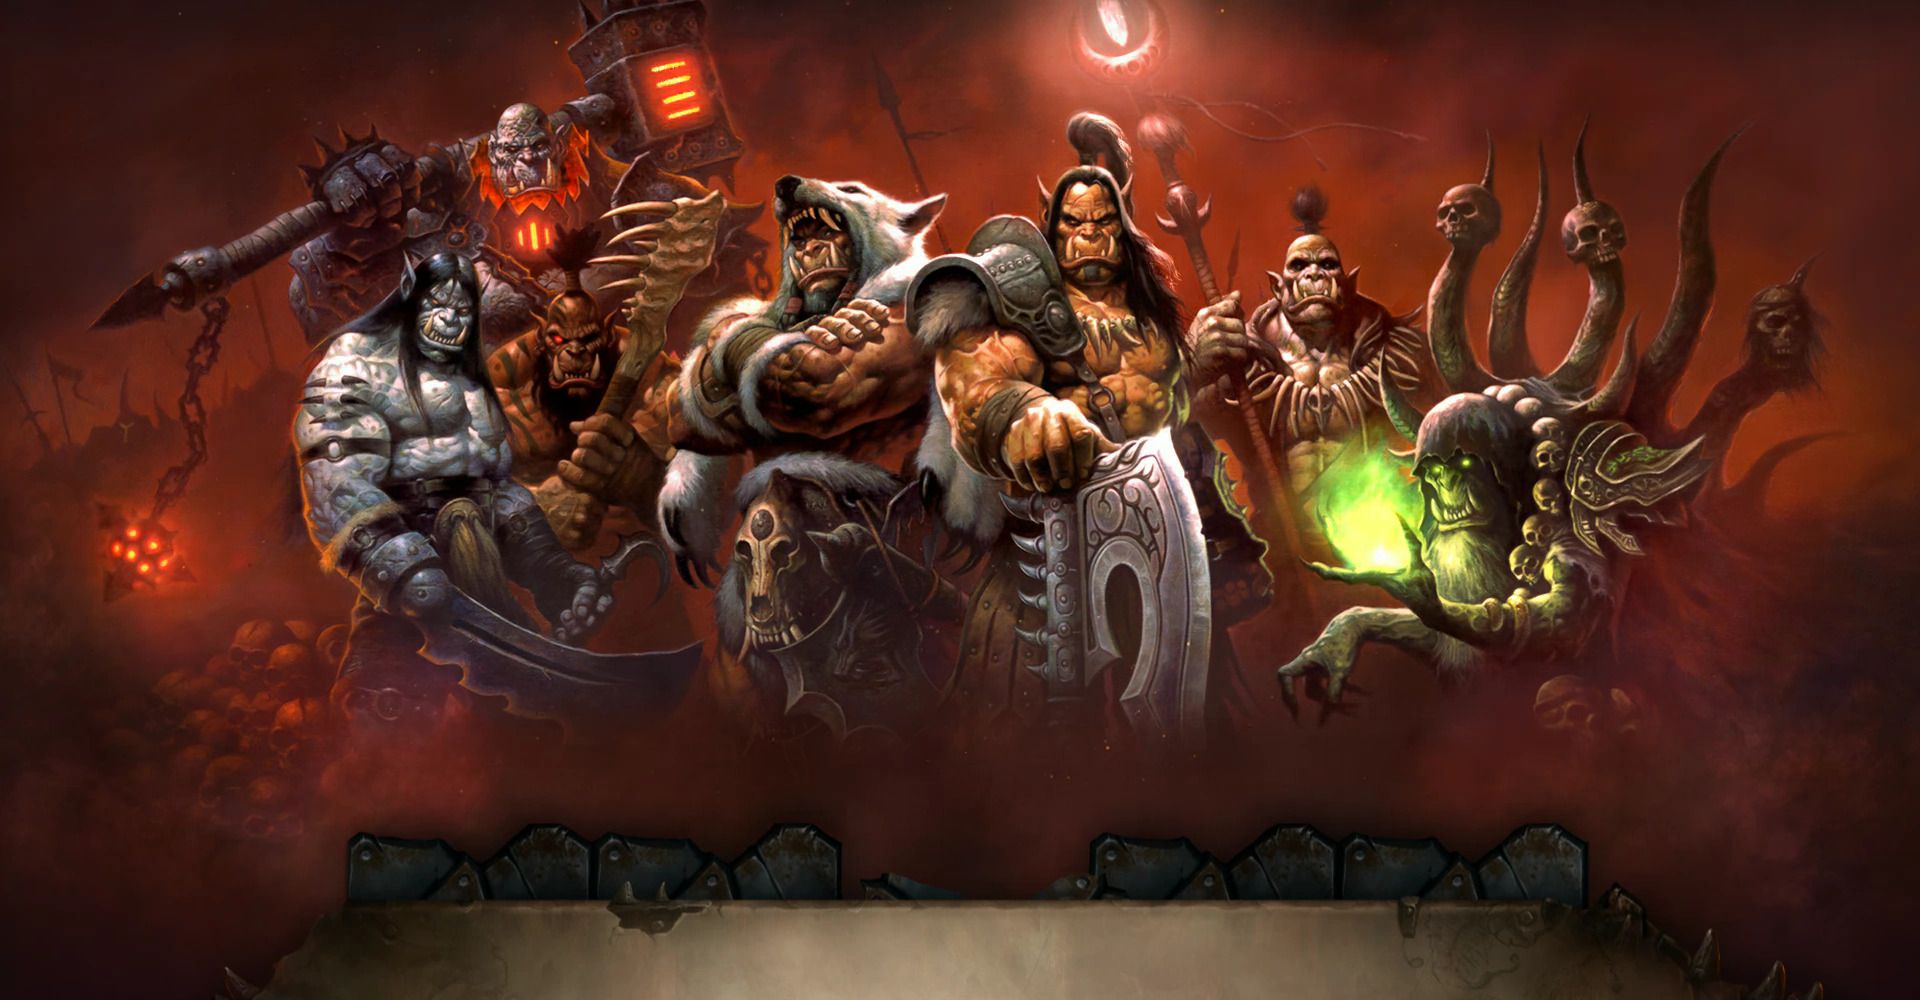 world of warcraft warlords of draenor